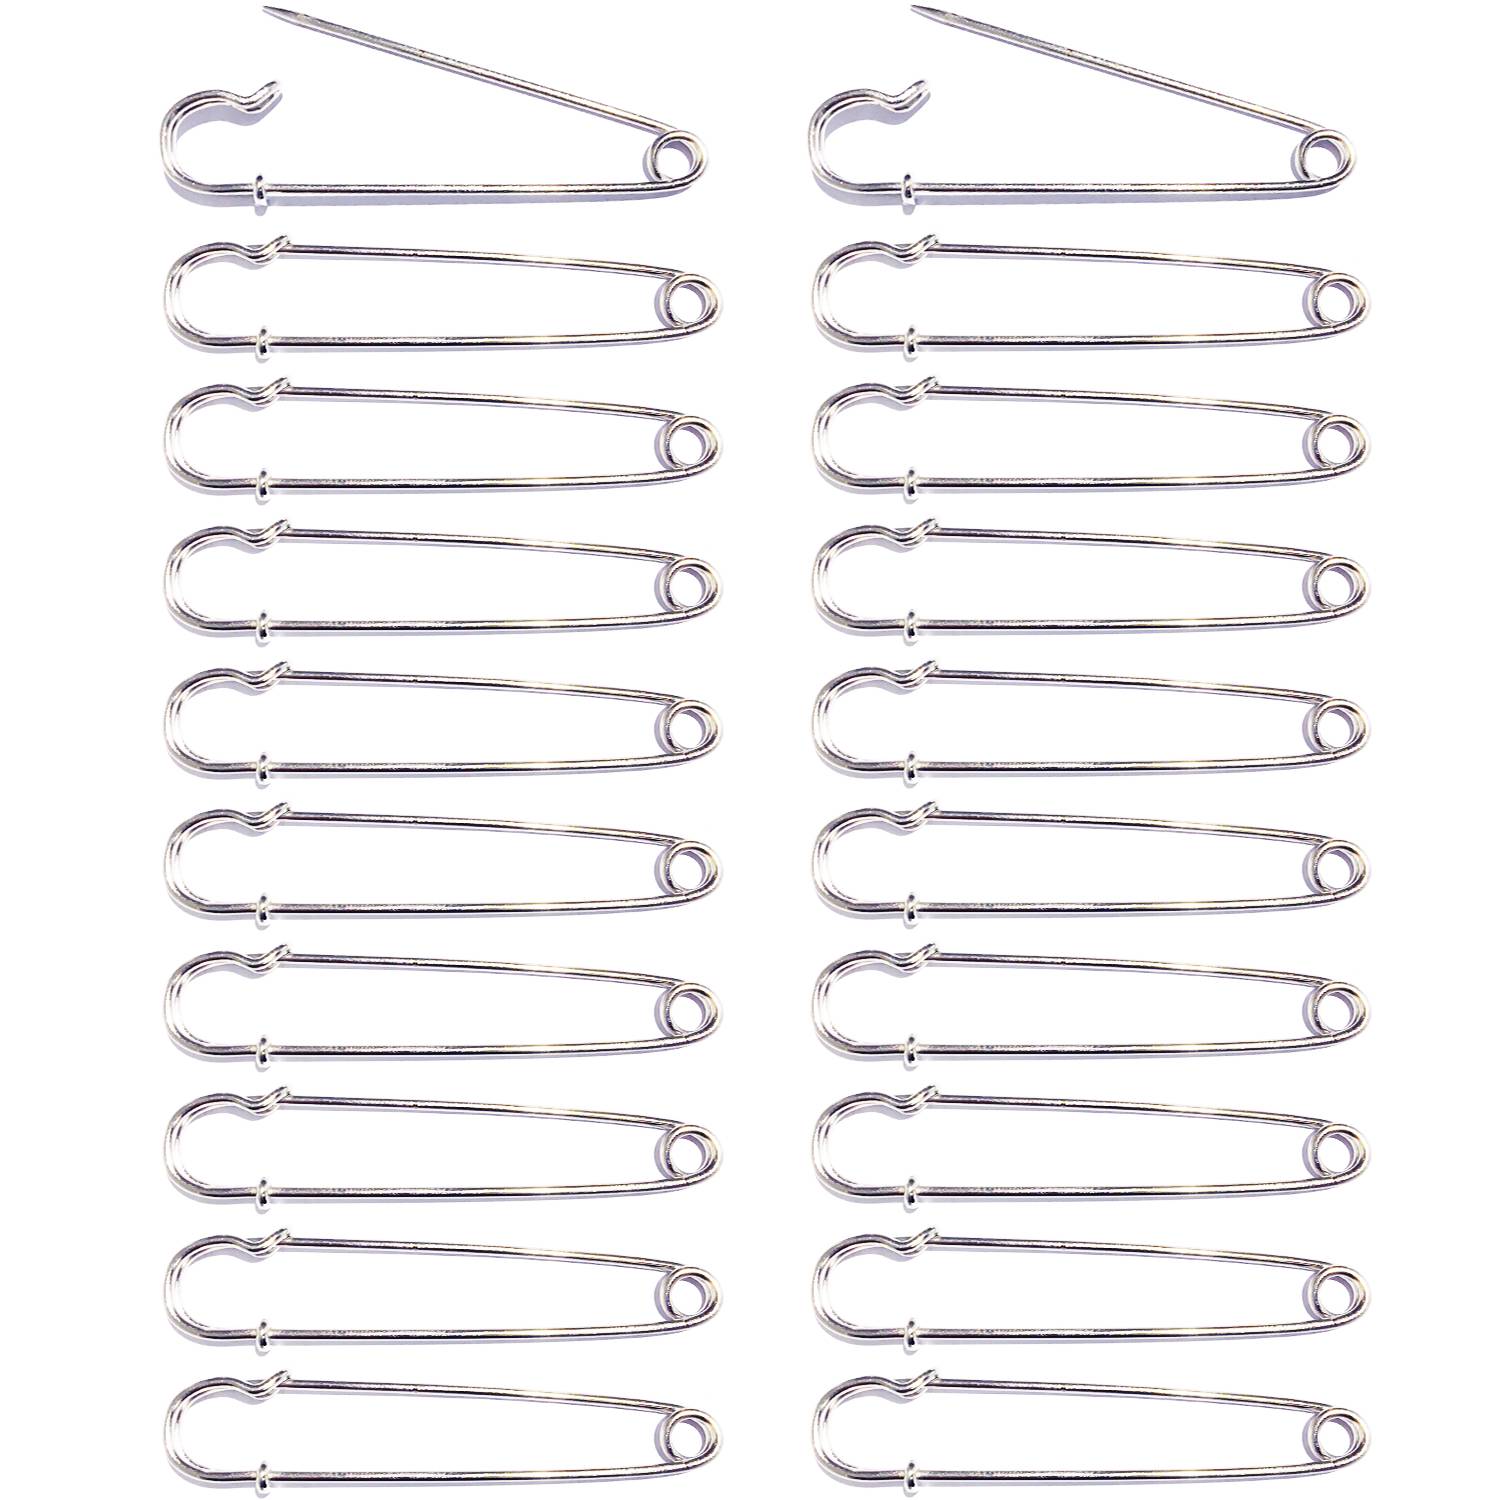 BENECREAT 20PCS 4 Antique Bronze Safety Pins Extra Large Heavy Duty Safety  Pins for Blankets, Skirts, Kilts, Knitted Fabric, Crafts 